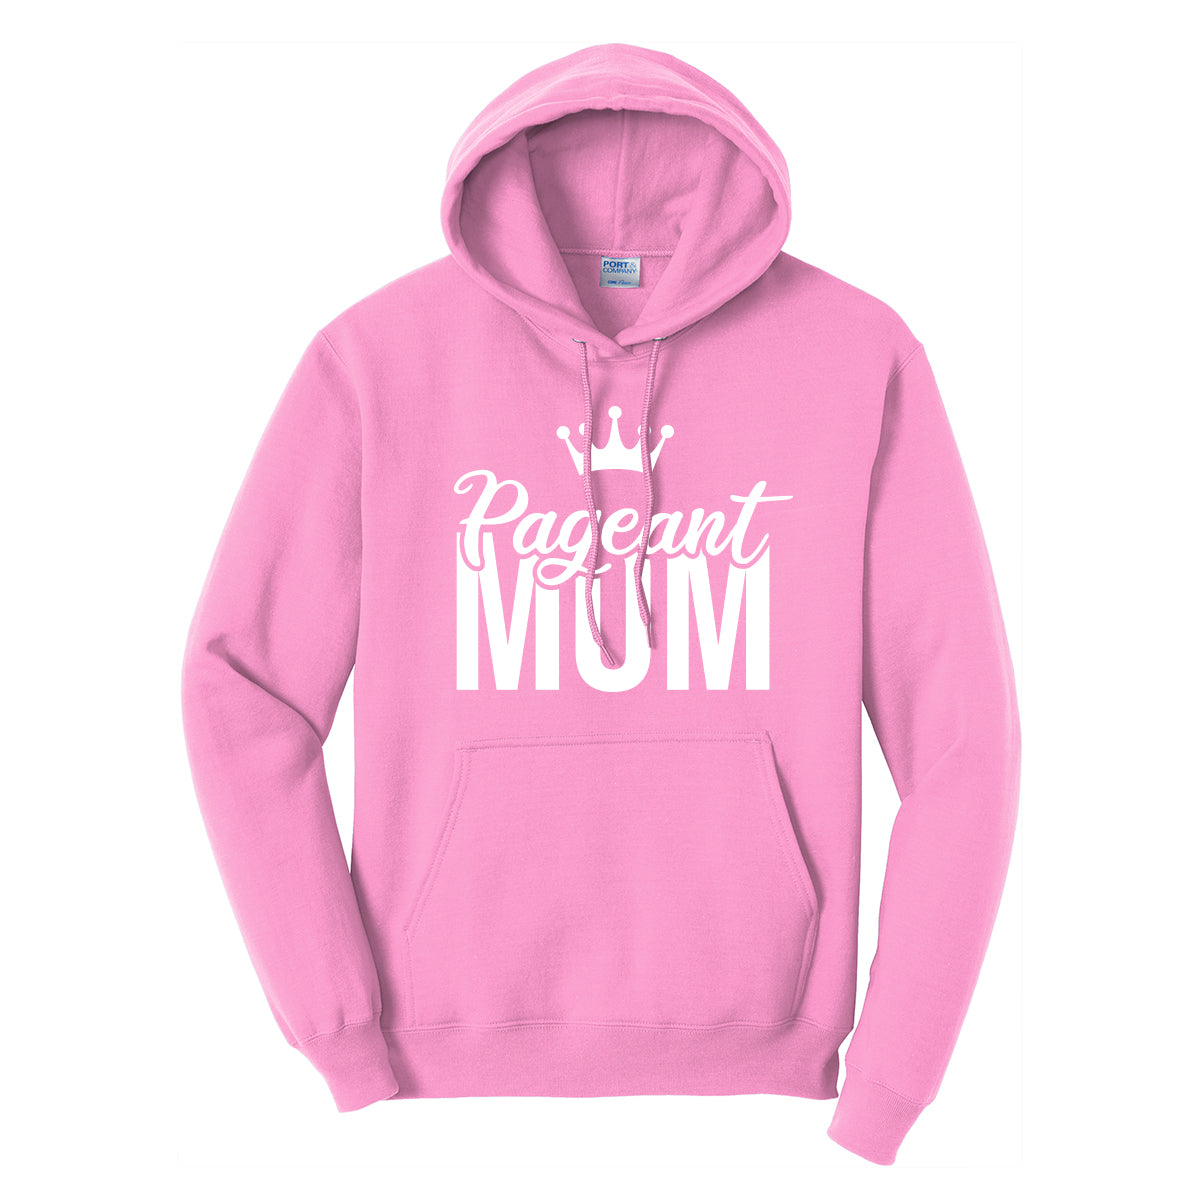 Pageant Mom Hoodie